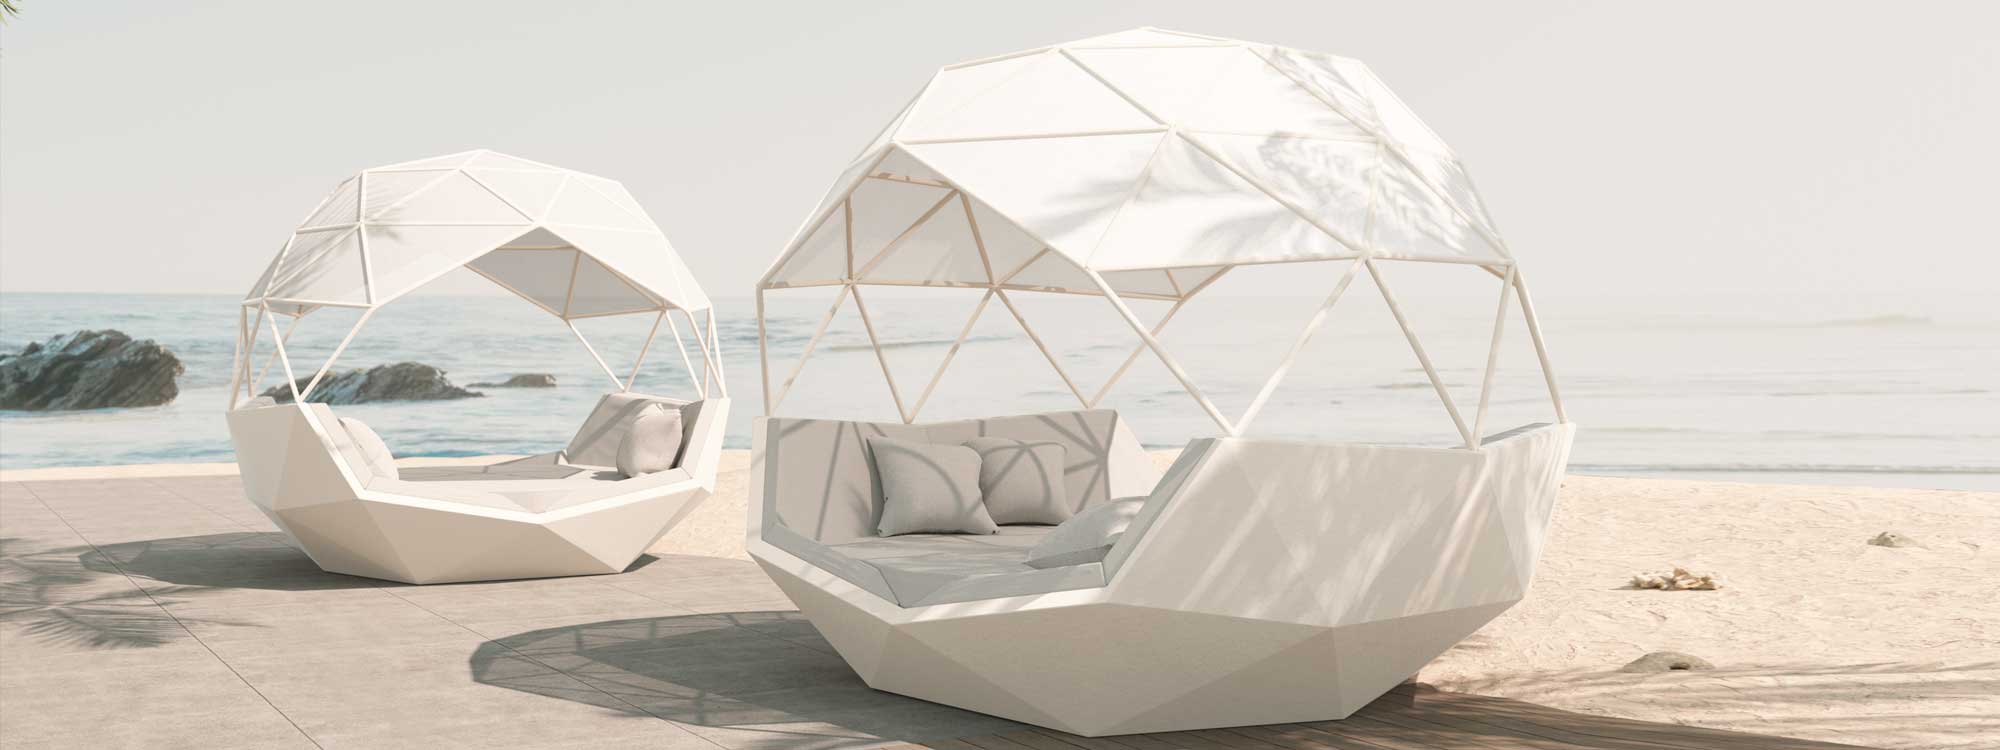 Image of pair of white Iglu twin daybeds by Vondom, shown on terrace with sea and rocks in the background